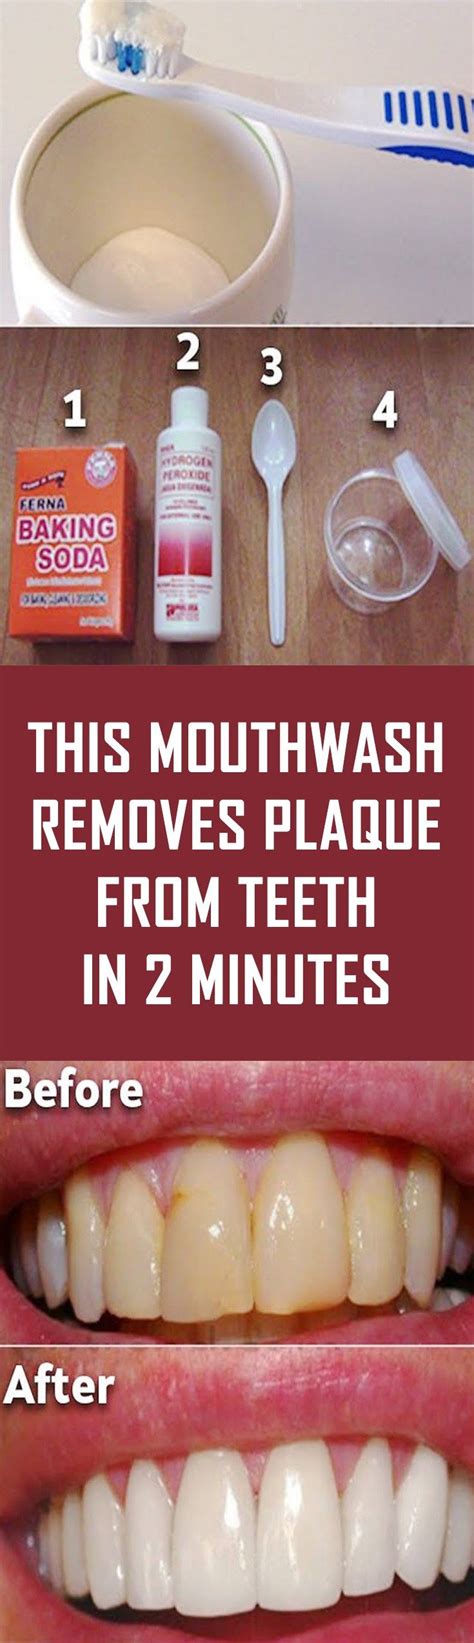 this mouthwash removes plaque from teeth in 2 minutes homemade